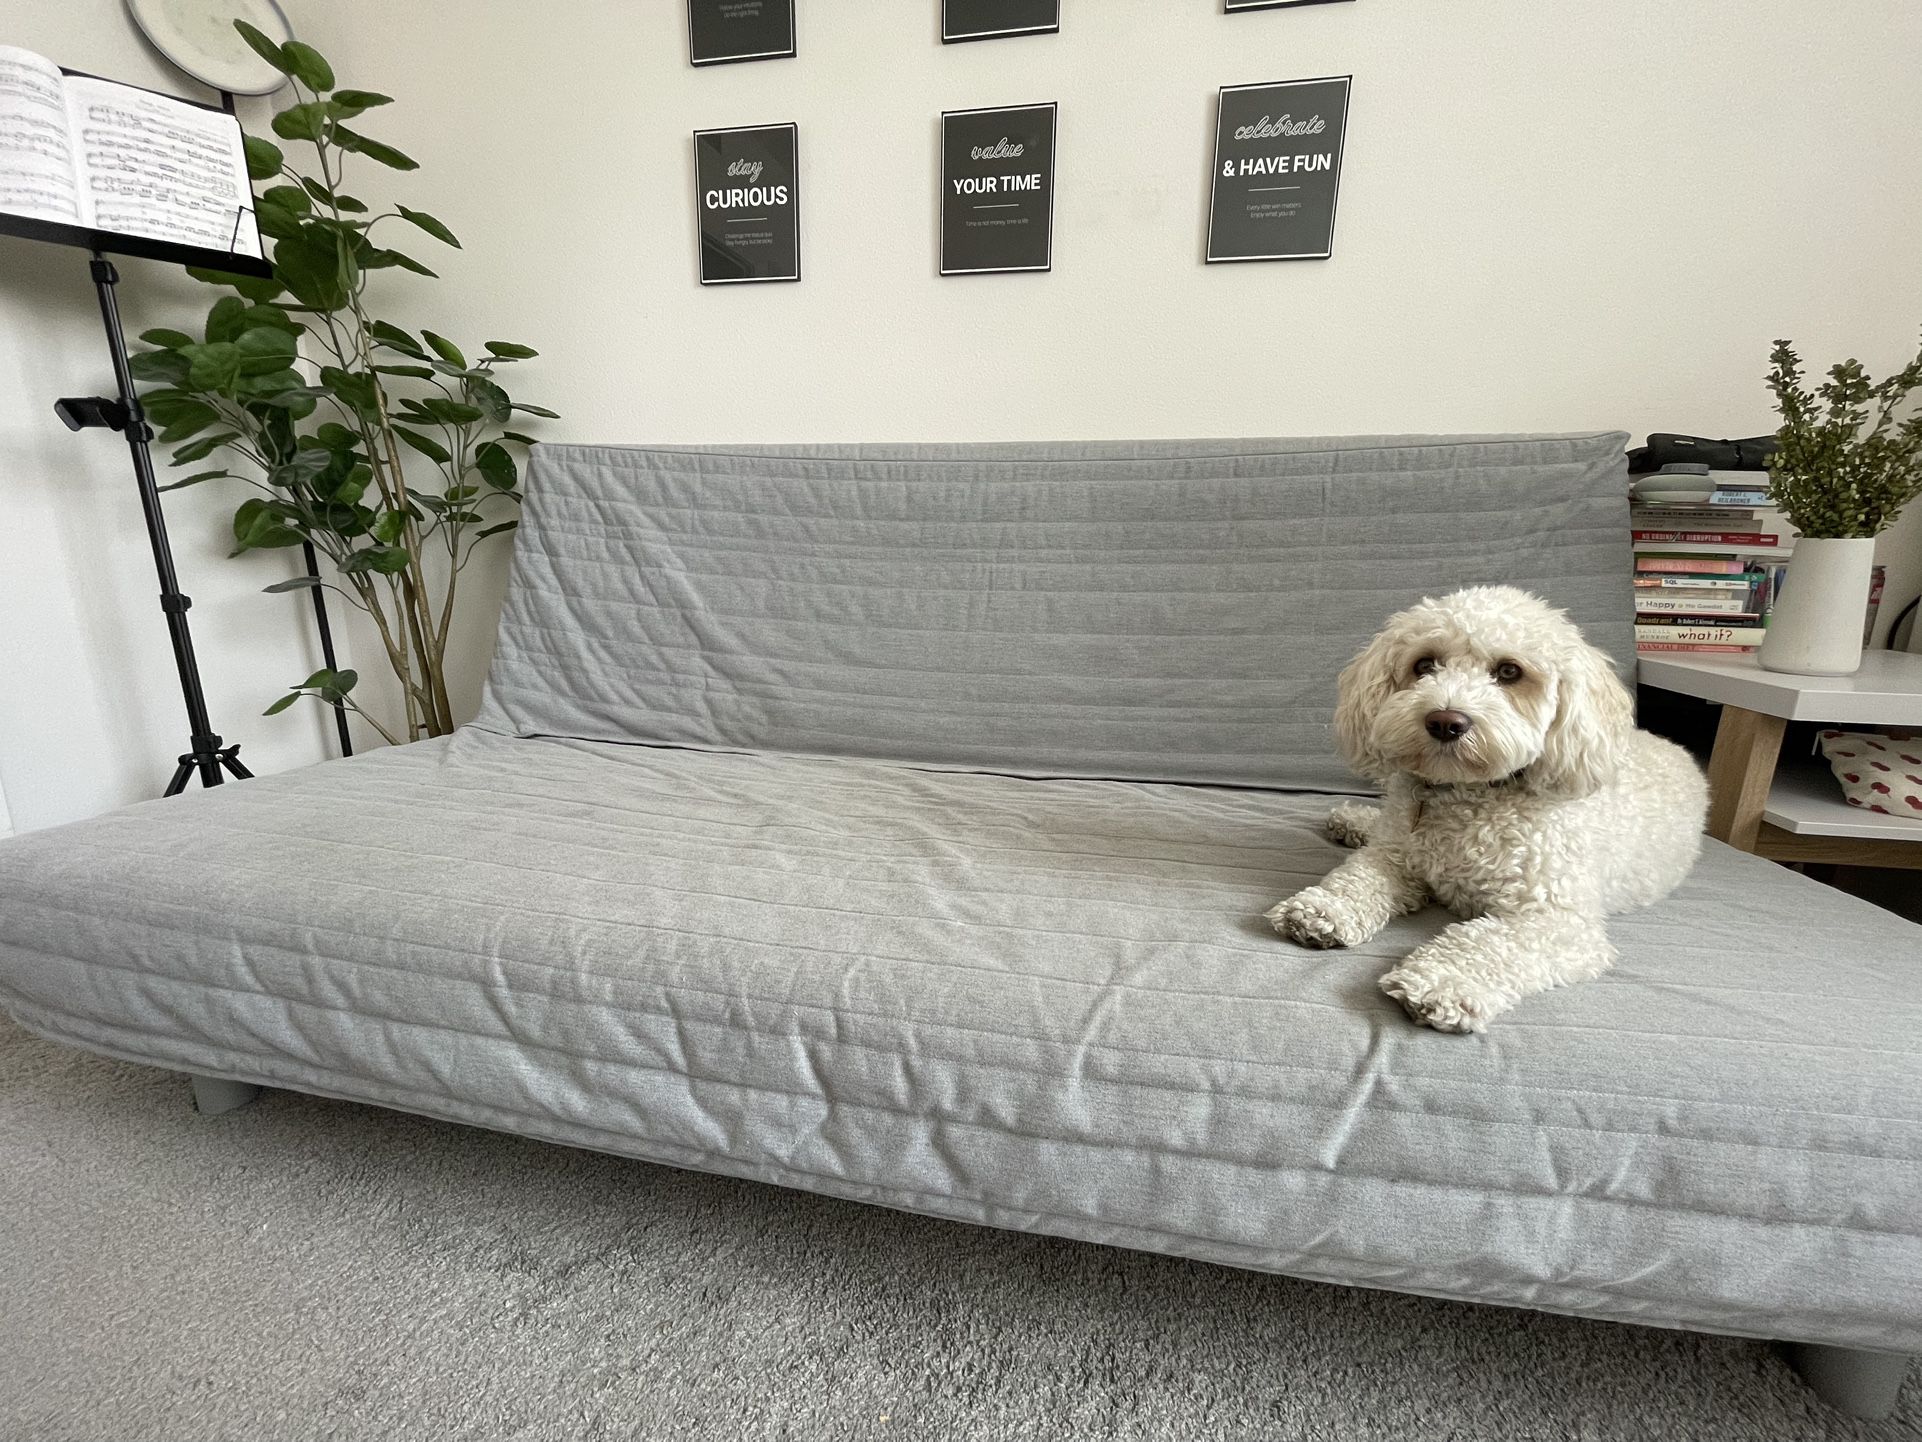 IKEA Convertible Futon with Washable Cover – Turns into Queen Bed